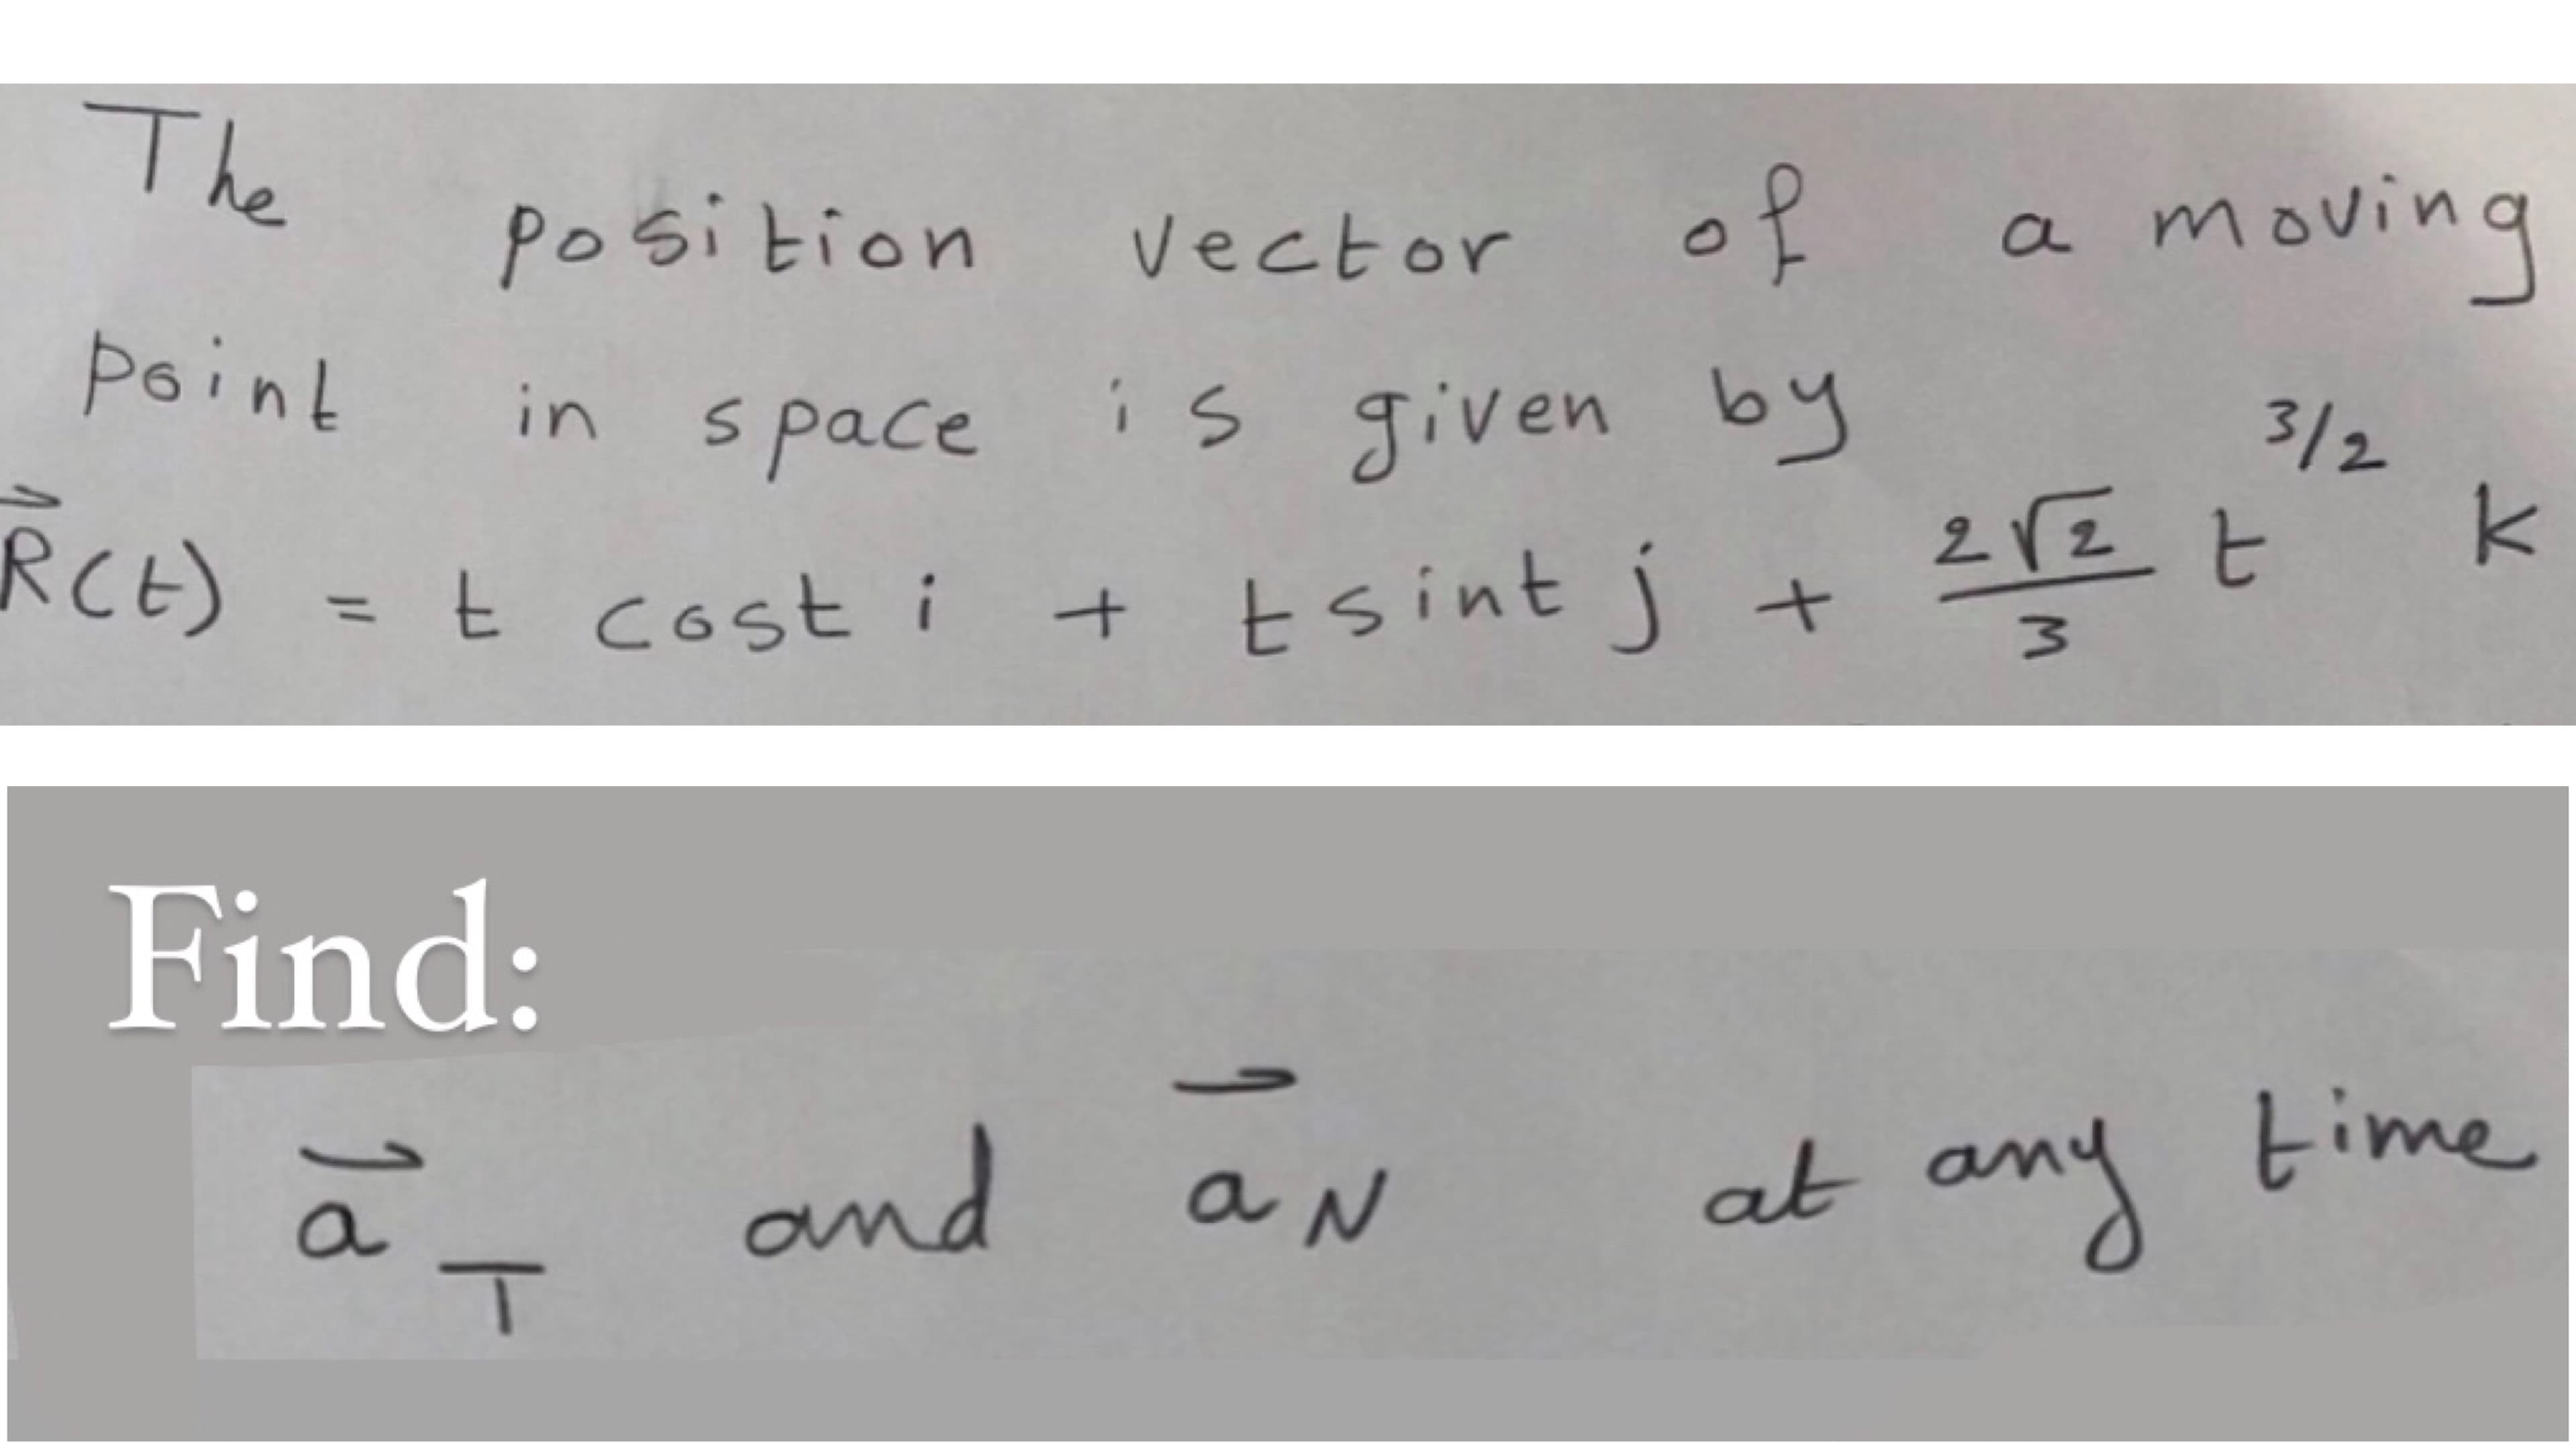 The
of
a moving
Position
Vector
3/2
point
in space
is given by
212 t
RCE) =t cost i + tsint J
+ Esint j +
%3D
Find:
H1
M.
